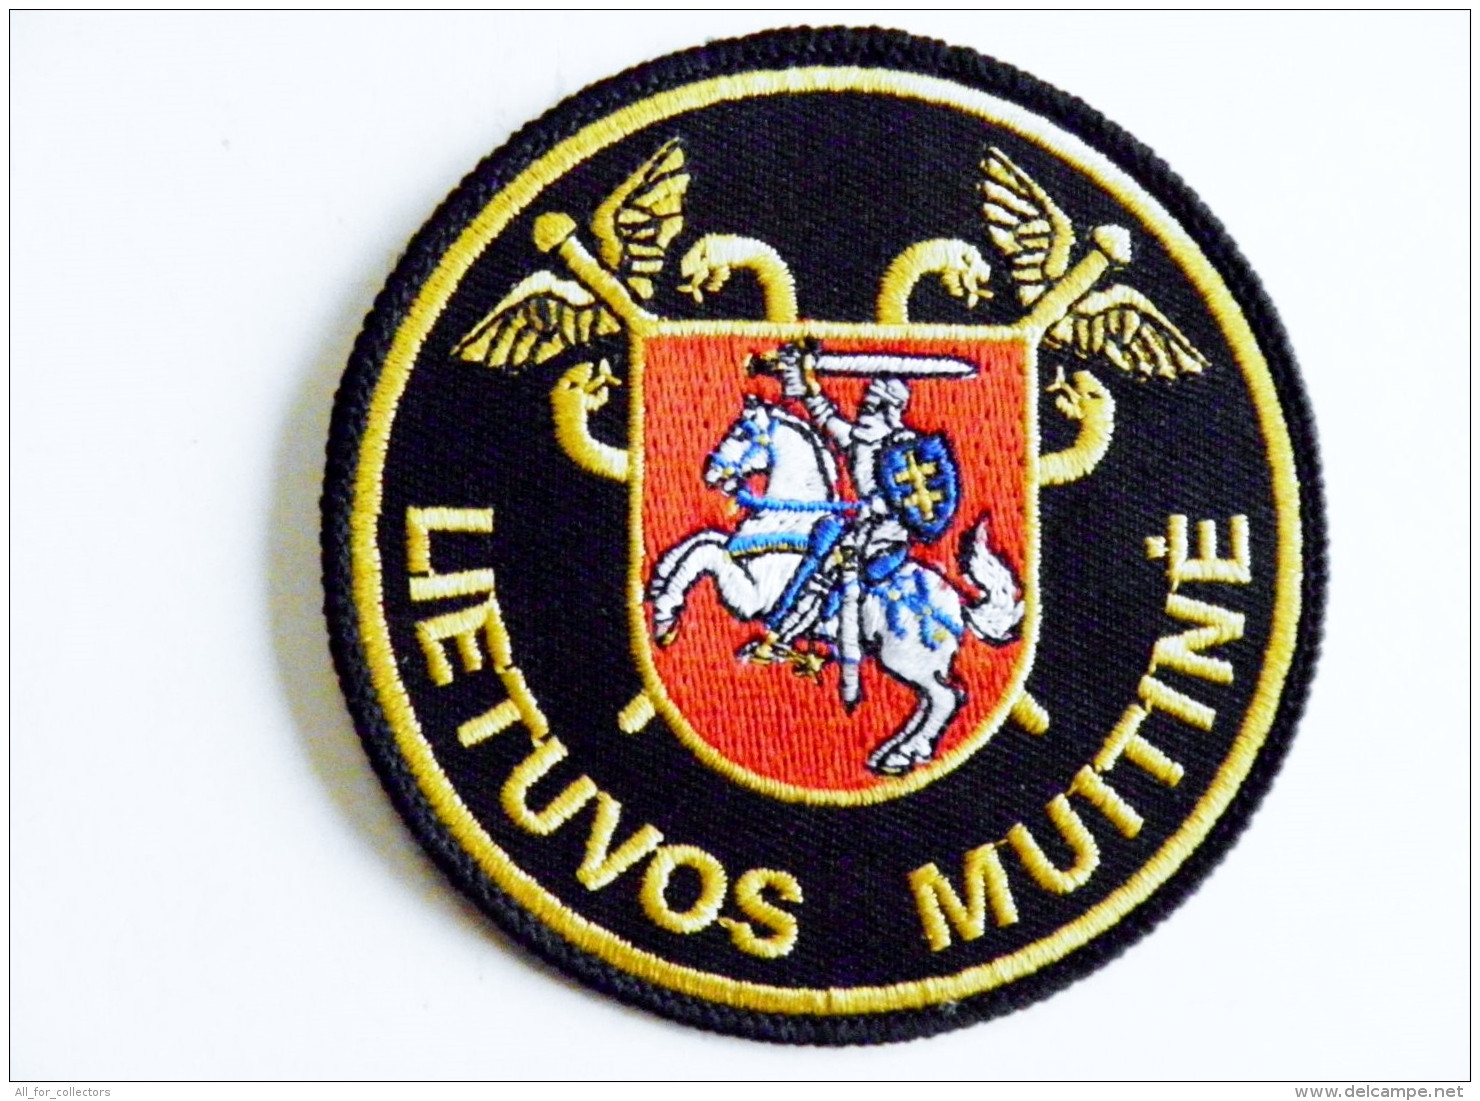 Patch Patches From Lithuania Custom Lithuania Customs Animals Snakes Horse Coat Of Arms - Ecussons Tissu